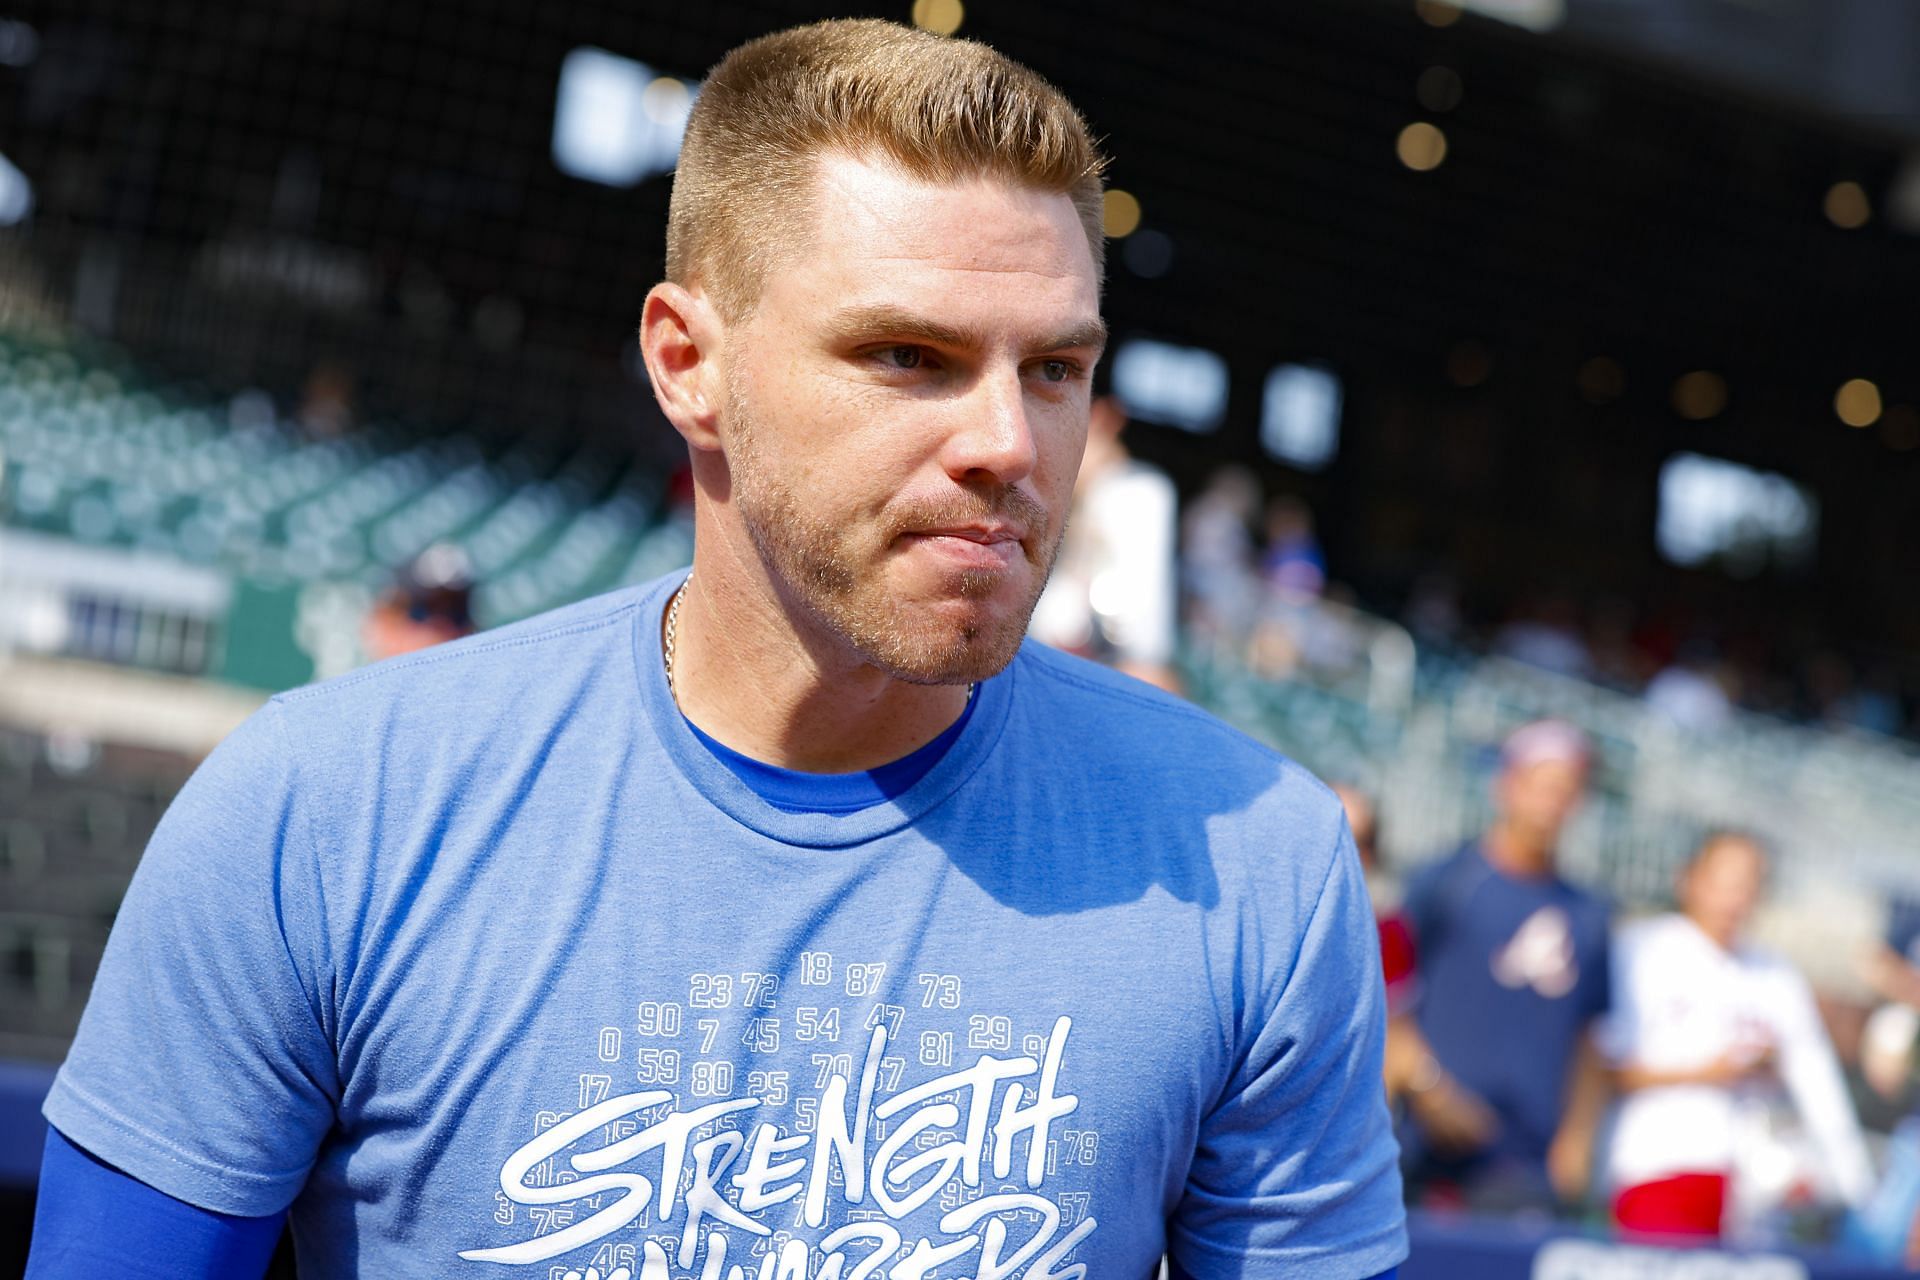 Los Angeles Dodgers star Freddie Freeman is visitng his former team, the Atlanta Braves, for the first time this season.